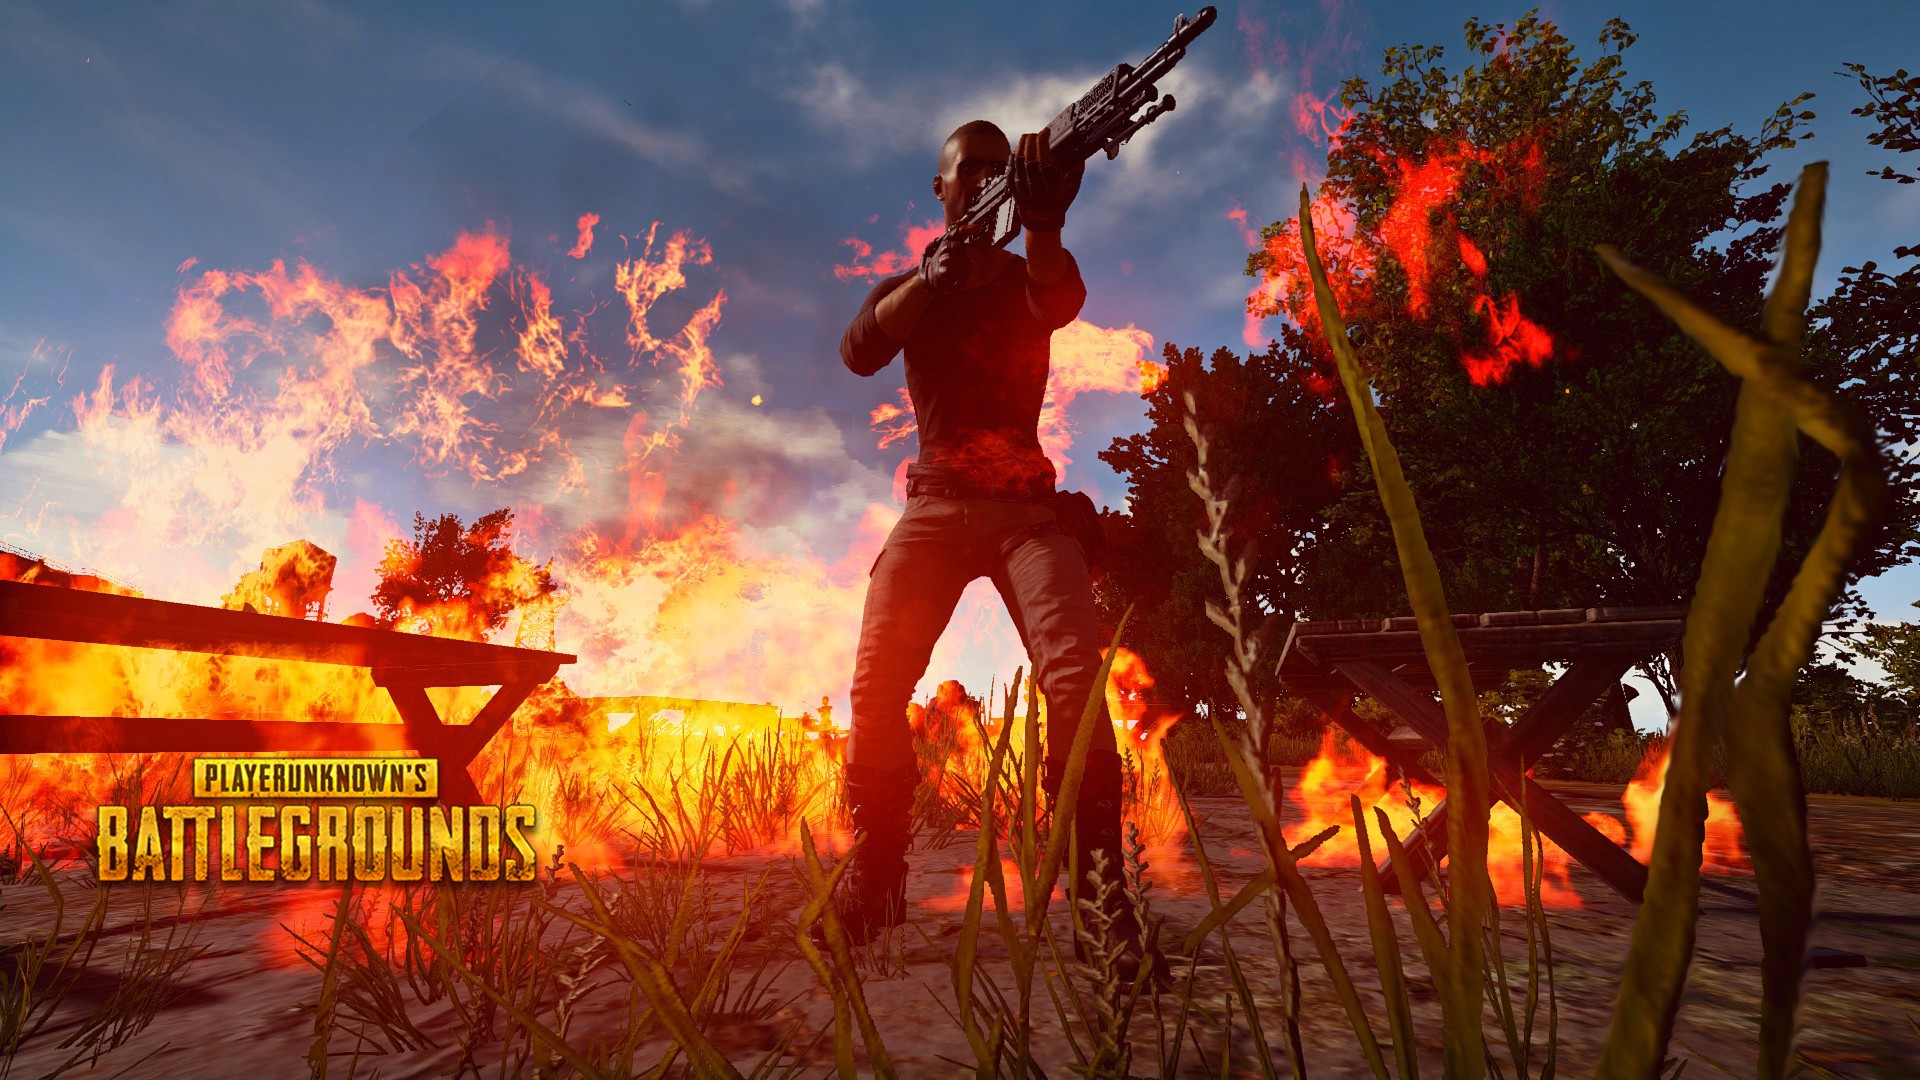 Wallpaper PUBG Xbox with image resolution 1920x1080 pixel. You can use this wallpaper as background for your desktop Computer Screensavers, Android or iPhone smartphones